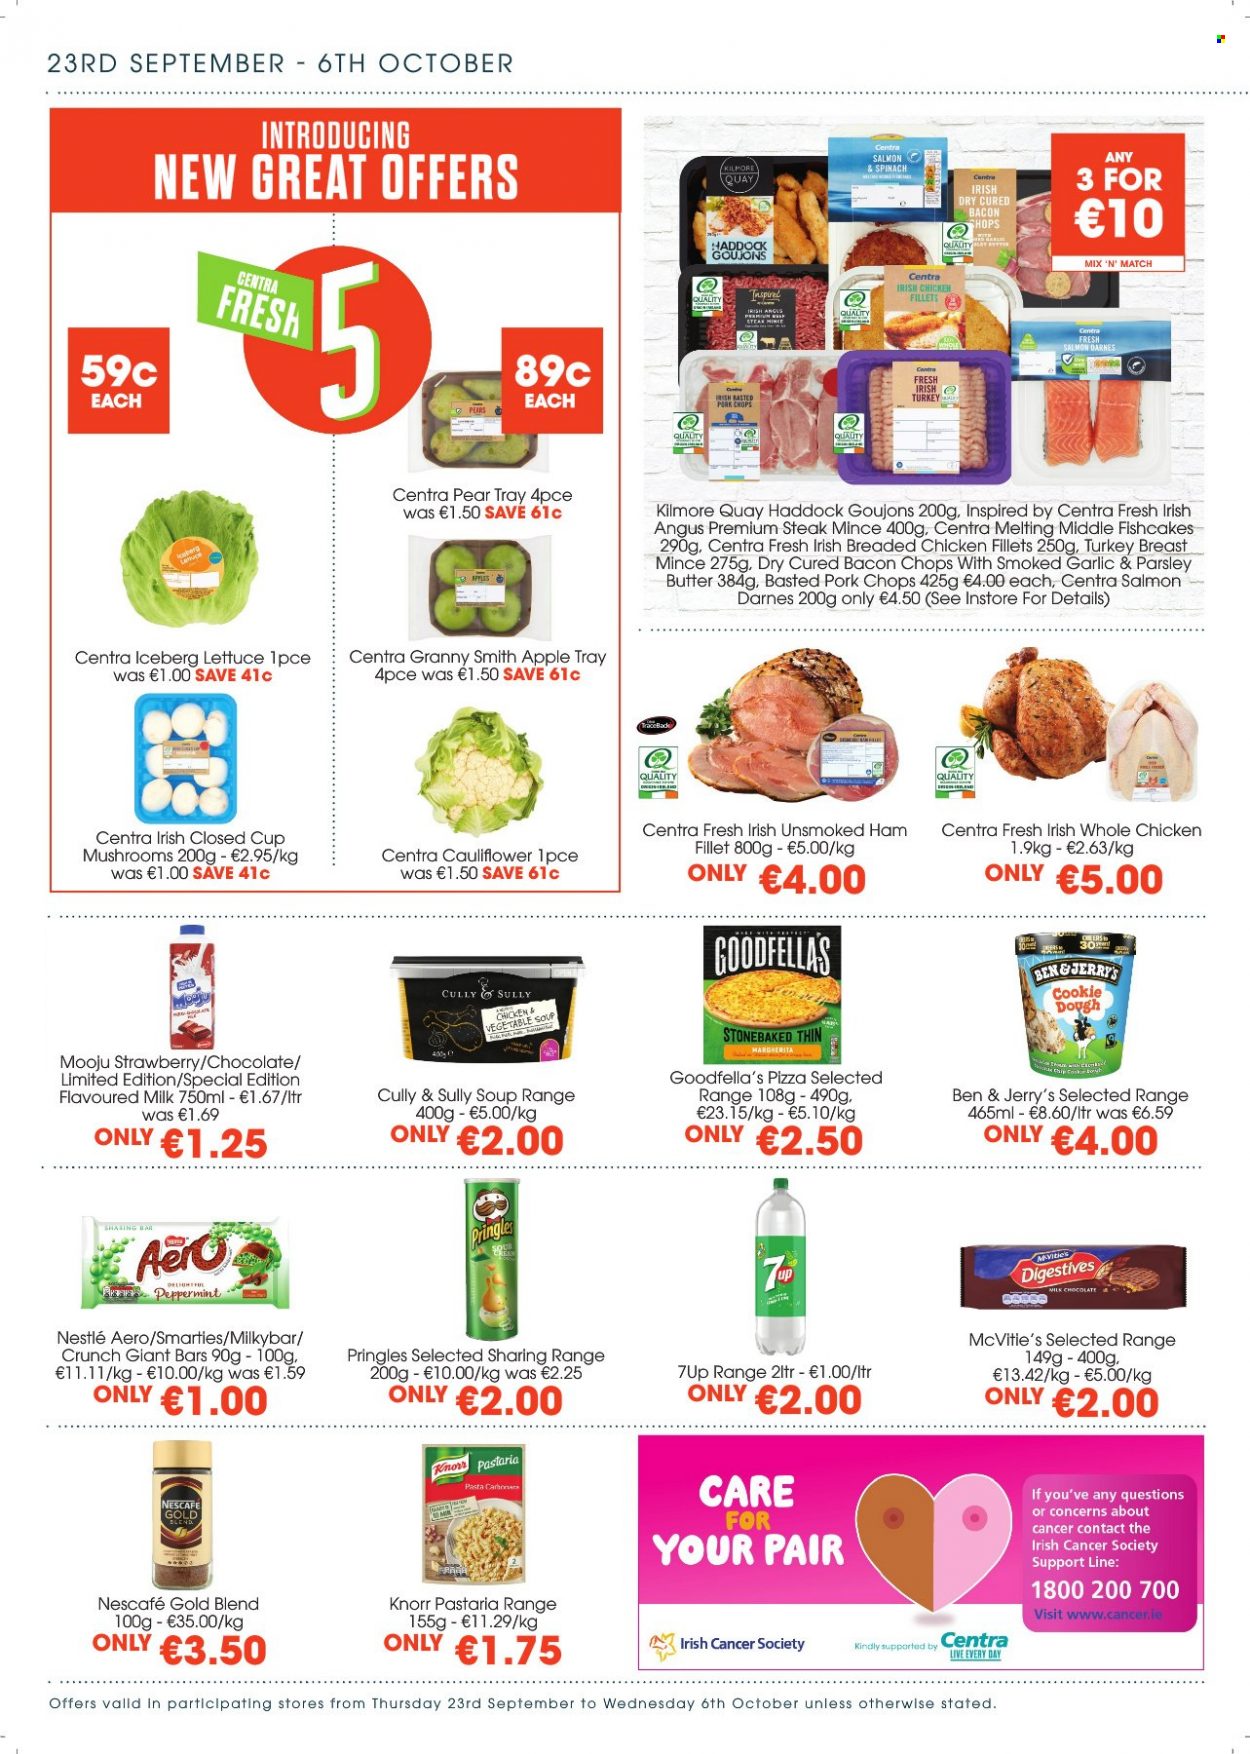 thumbnail - Centra offer  - 23.09.2021 - 06.10.2021 - Sales products - parsley, lettuce, pears, Granny Smith, salmon, haddock, pizza, soup, pasta, Knorr, fried chicken, bacon, ham, milk, flavoured milk, butter, Ben & Jerry's, fish cake, Nestlé, chocolate, Smarties, Milkybar, Pringles, 7UP, Nescafé, turkey breast, whole chicken, steak, pork chops, pork meat, tray. Page 2.